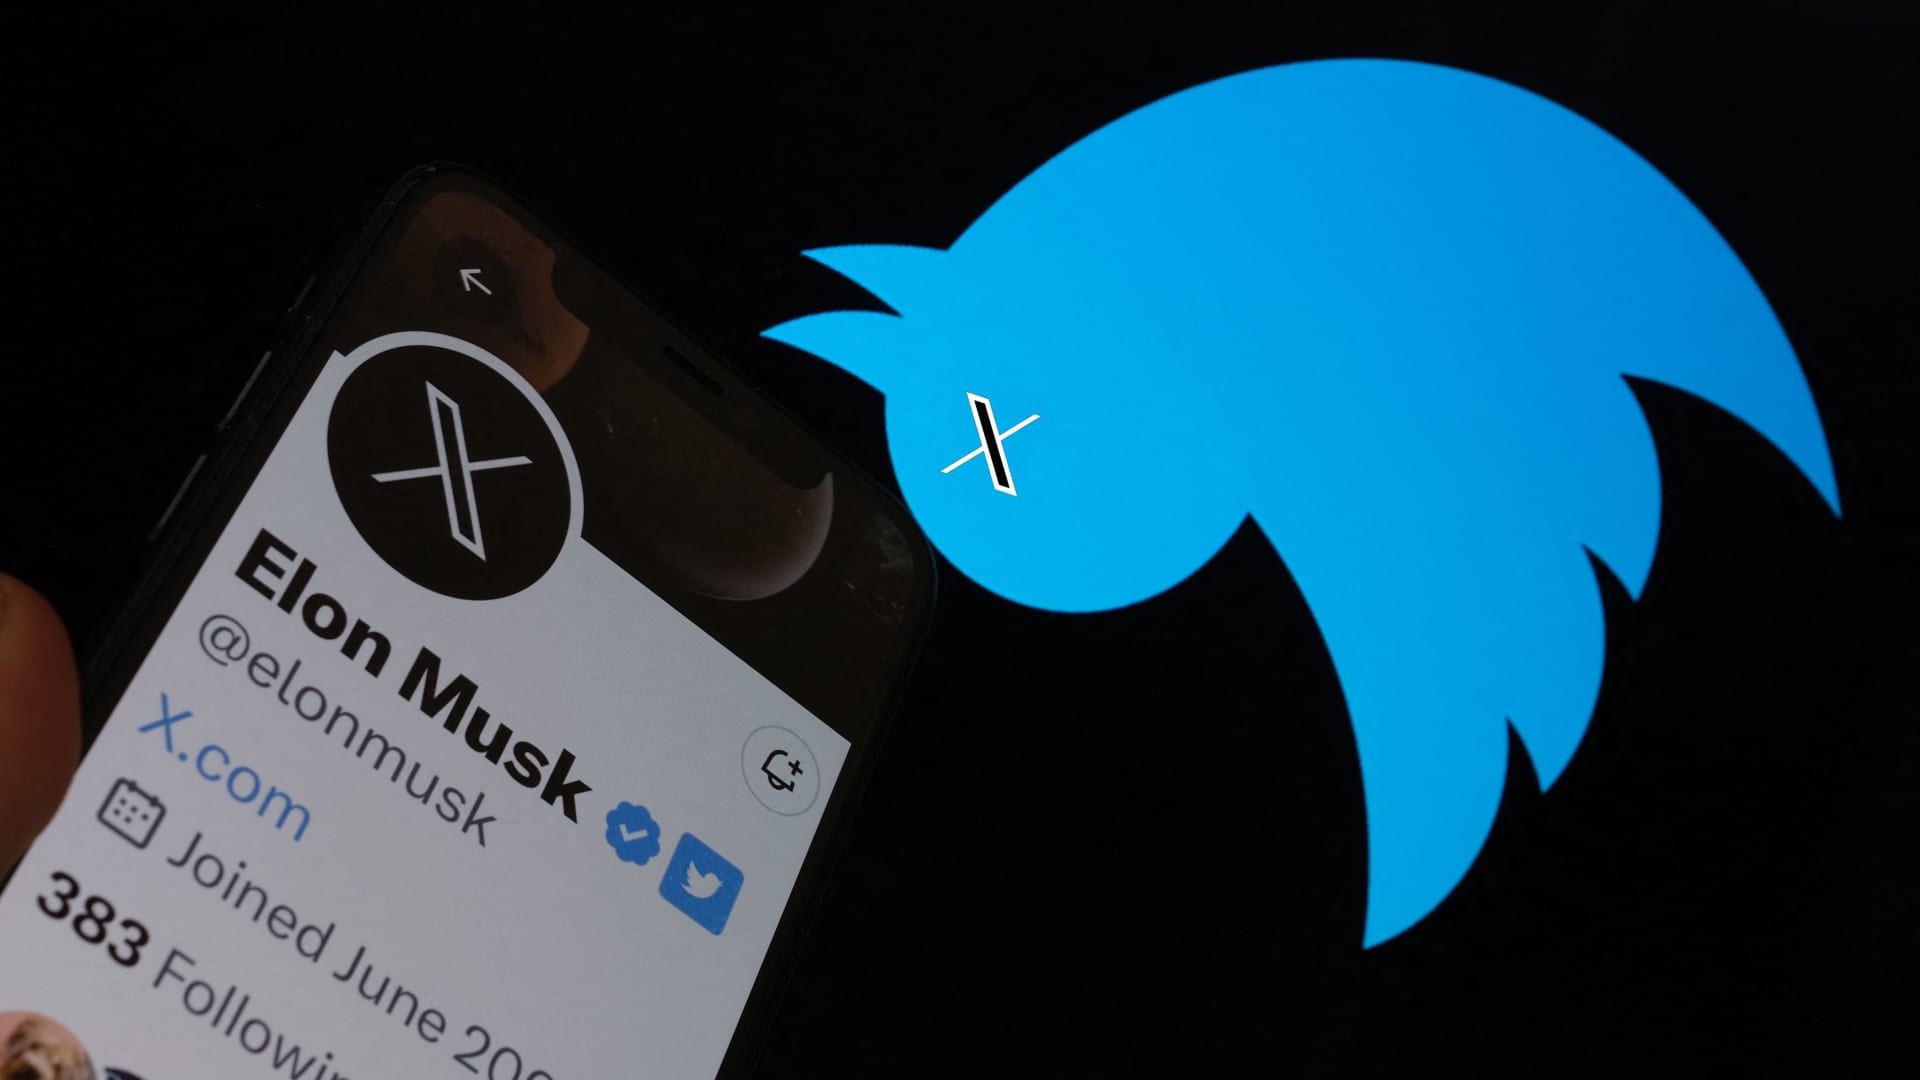 X logo officially replaces Twitter's famous bird on mobile app 